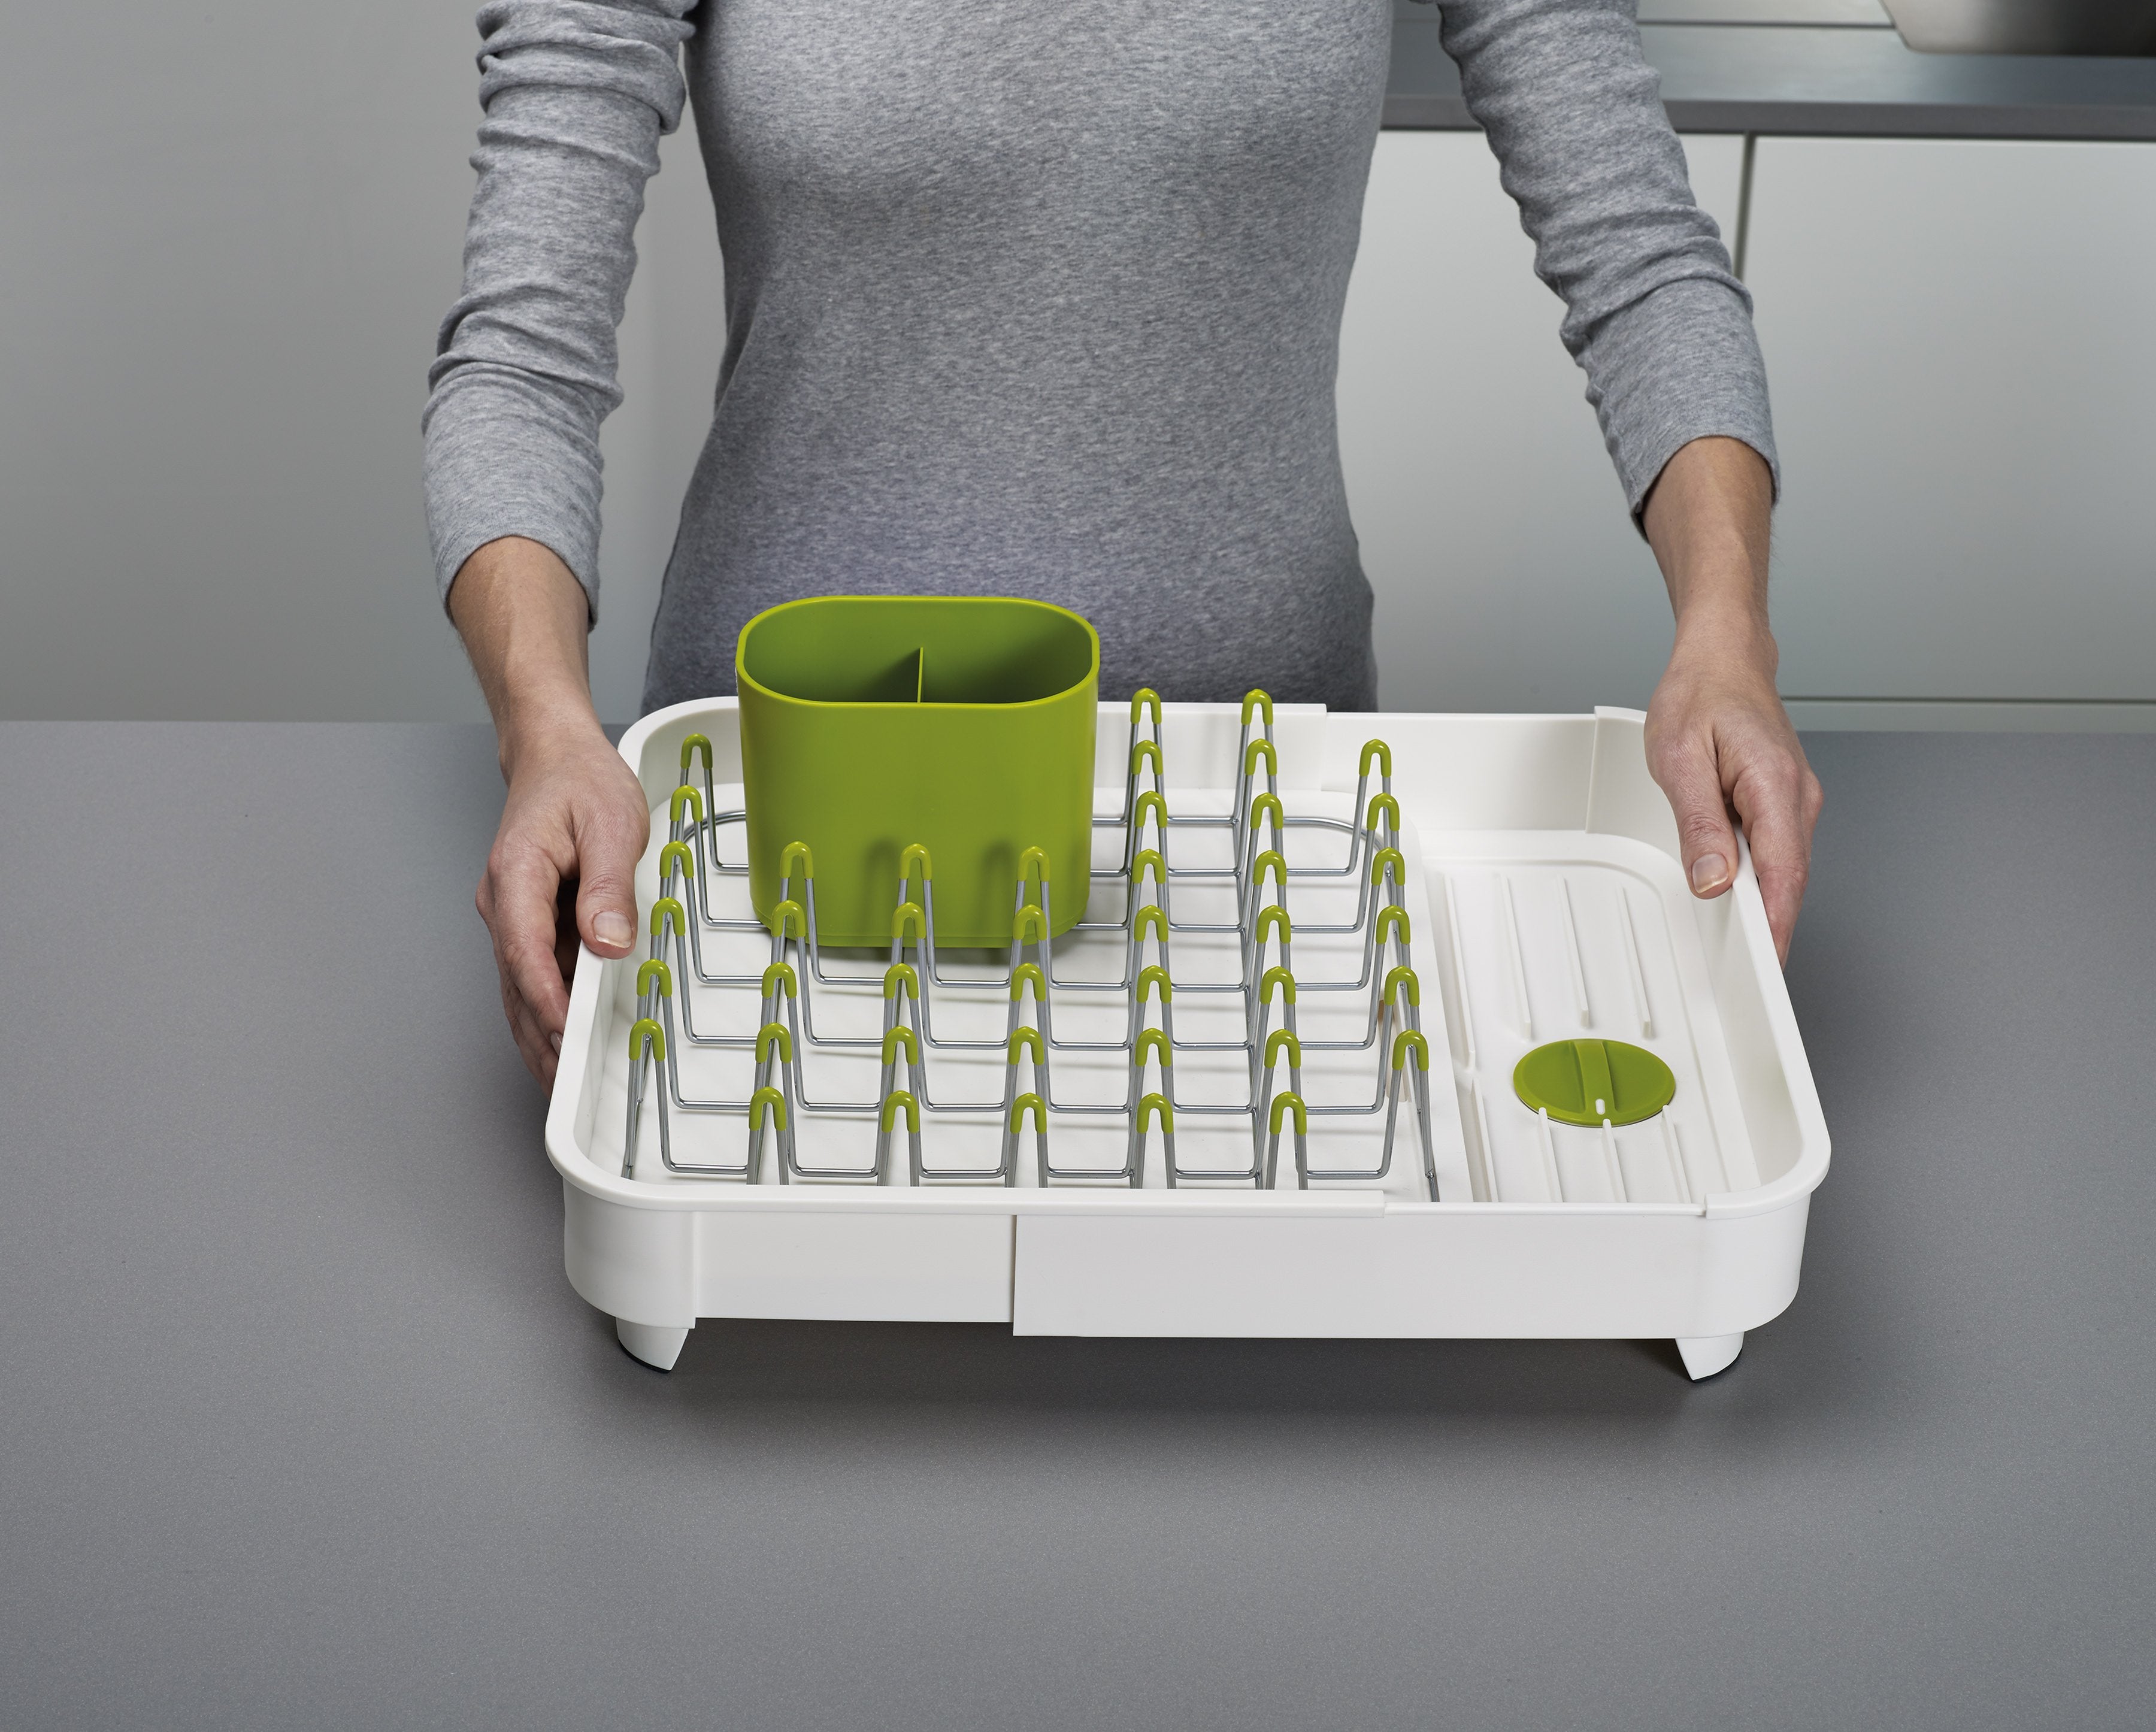 BEON.COM.AU  This versatile dish rack allows you to quickly and easily expand your dish drying space to almost twice its size when needed.  Extends to almost twice its size to hold more items when needed Integrated plug can be set to trap water for draining later Raised ribs prevent water being trapped under... Joseph Joseph at BEON.COM.AU